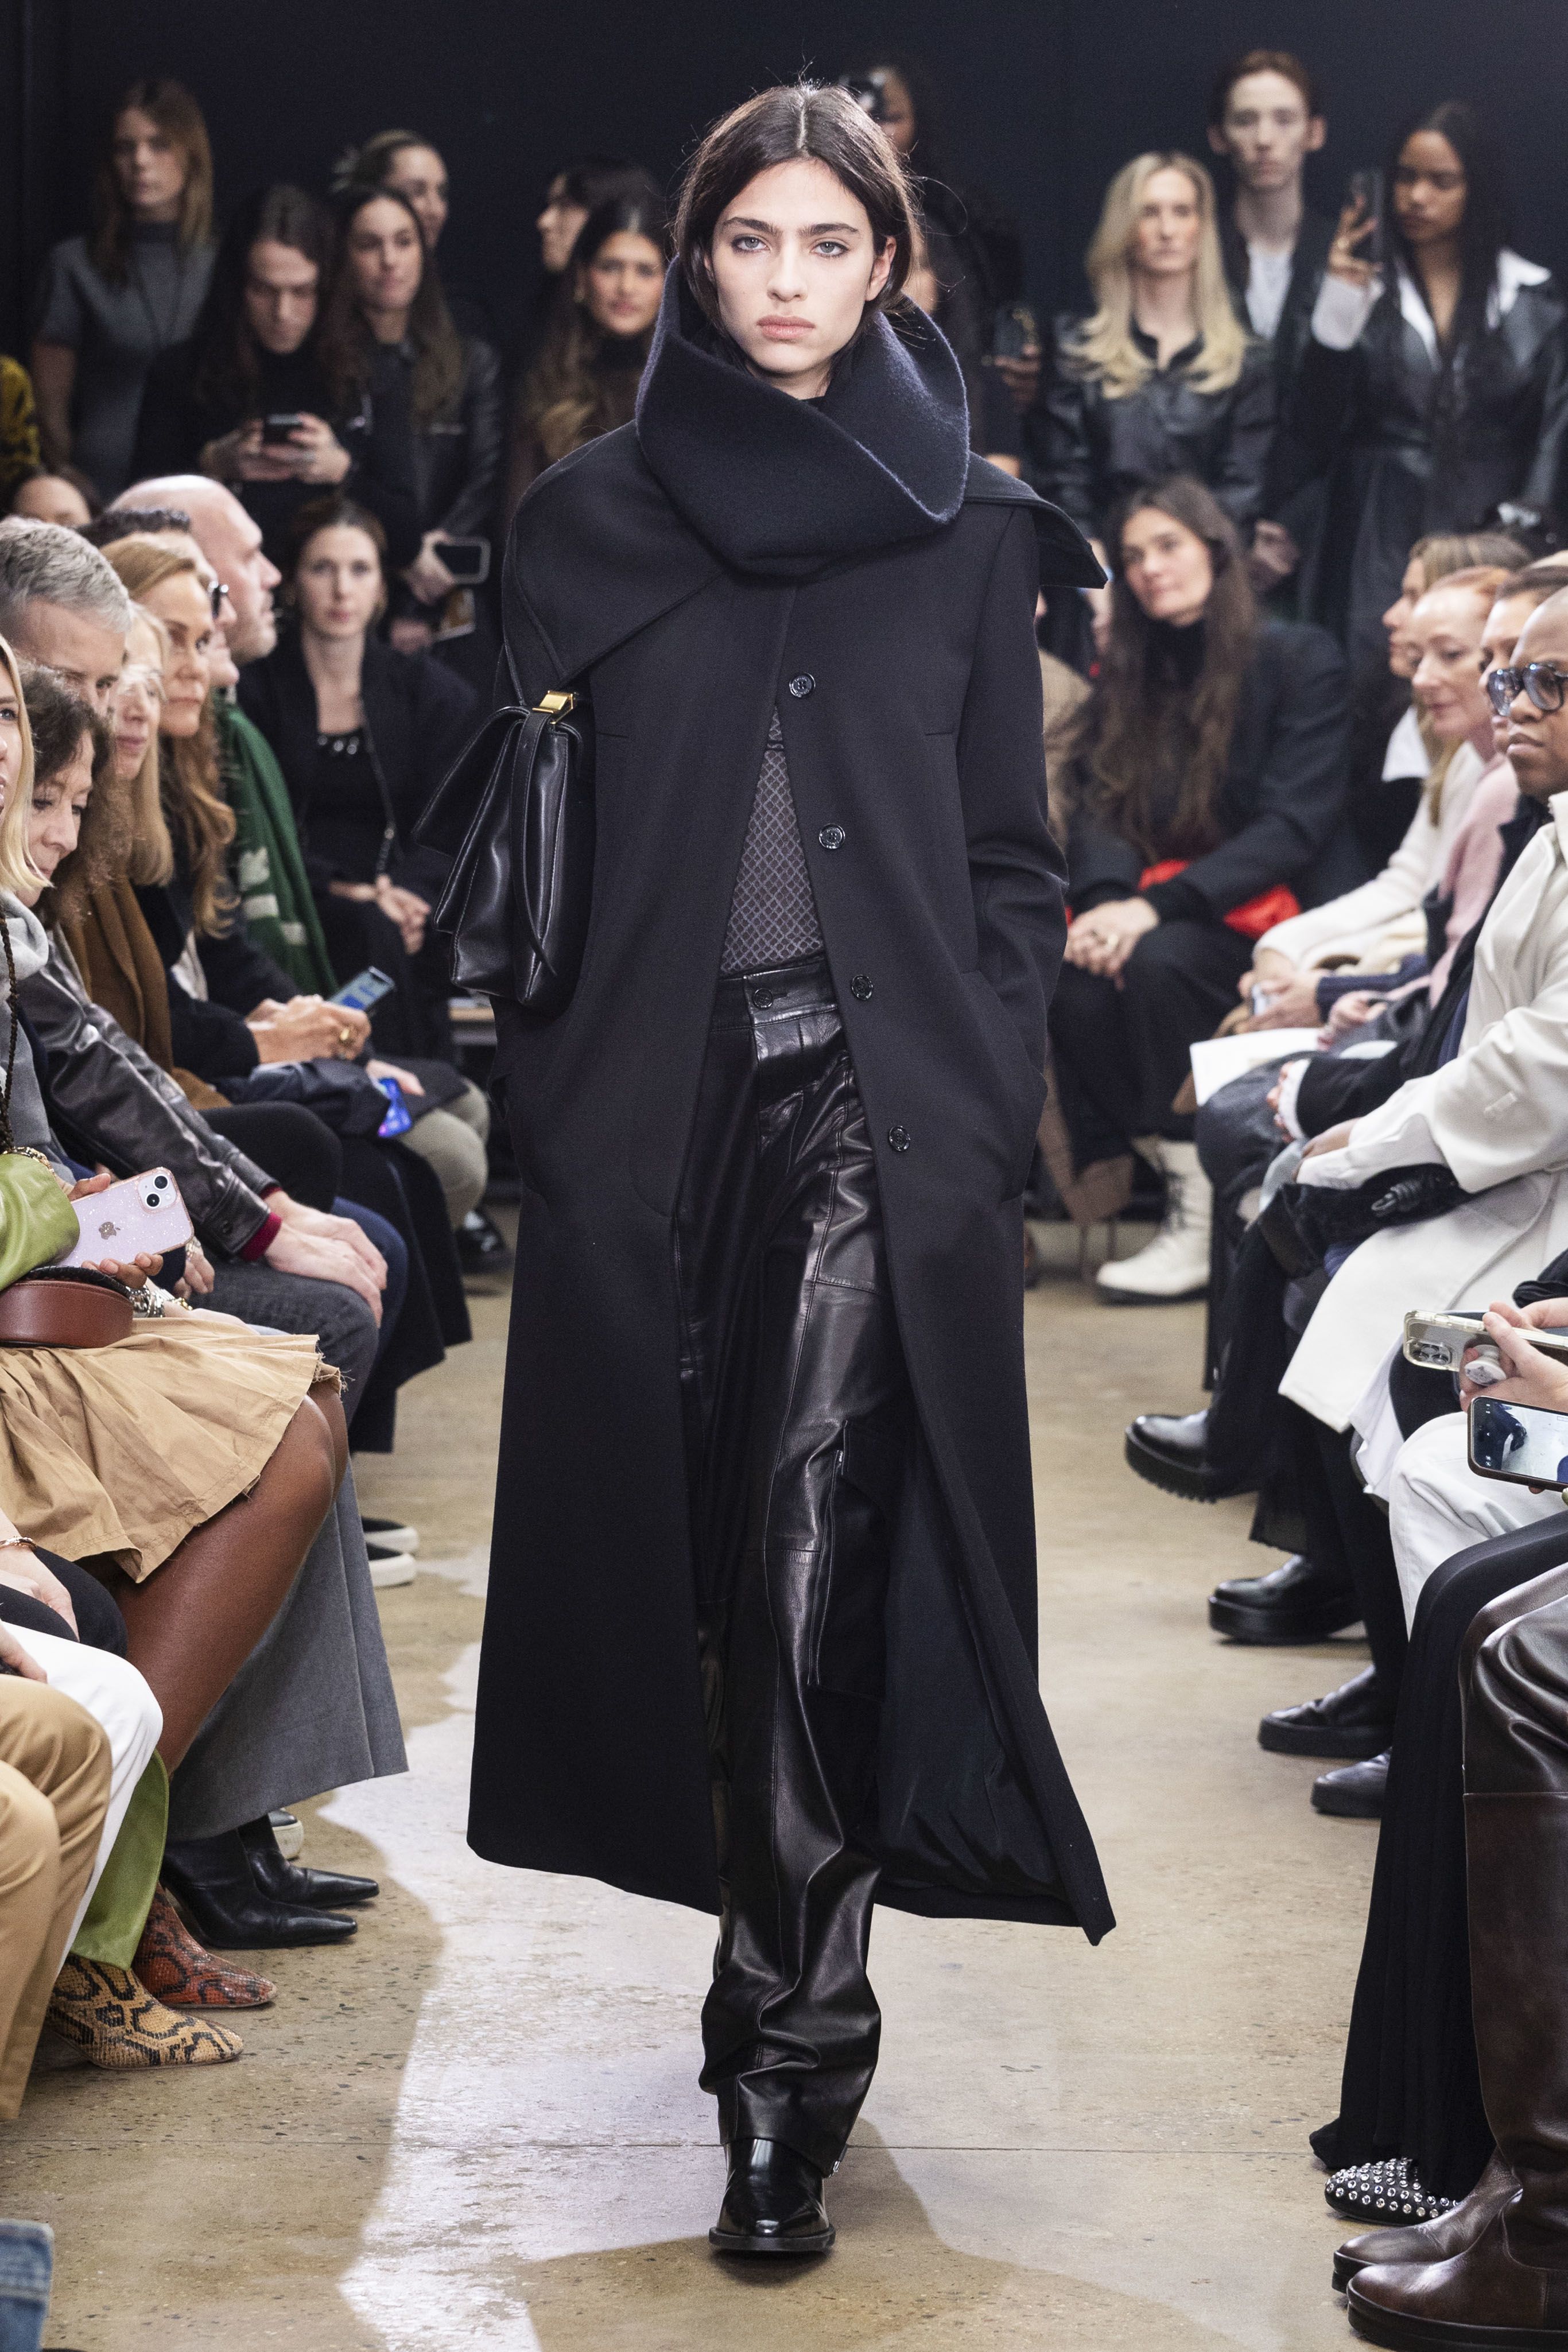 Highlights included tall cowl neck collars, asymmetrical cuts, knit capes and long apron dresses.